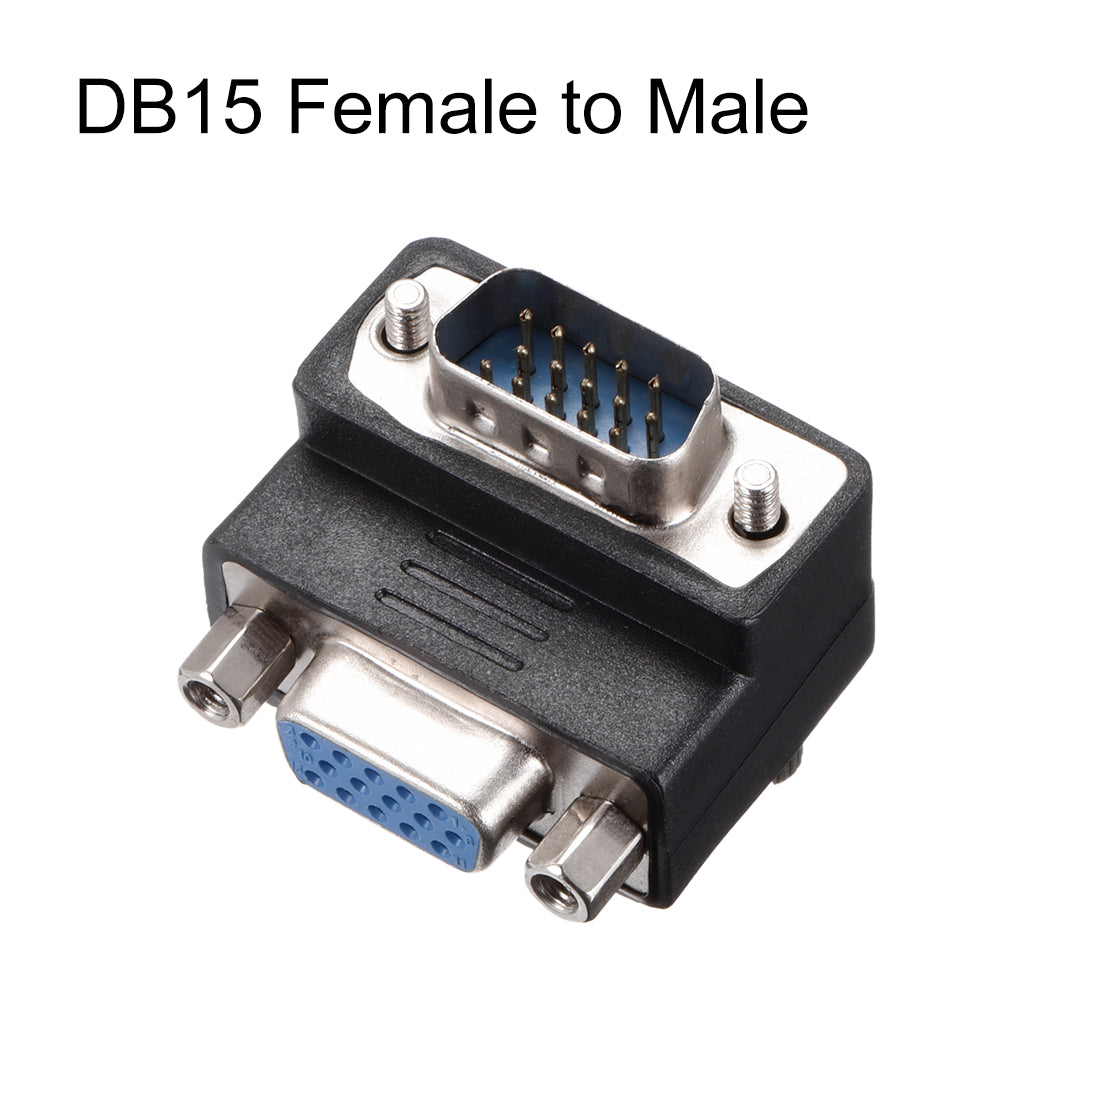 uxcell Uxcell DB15 VGA Gender Changer 15 Pin Female to Male 3-row Right Angle Mini Gender Changer Coupler Adapter Connector for Serial Applications Black